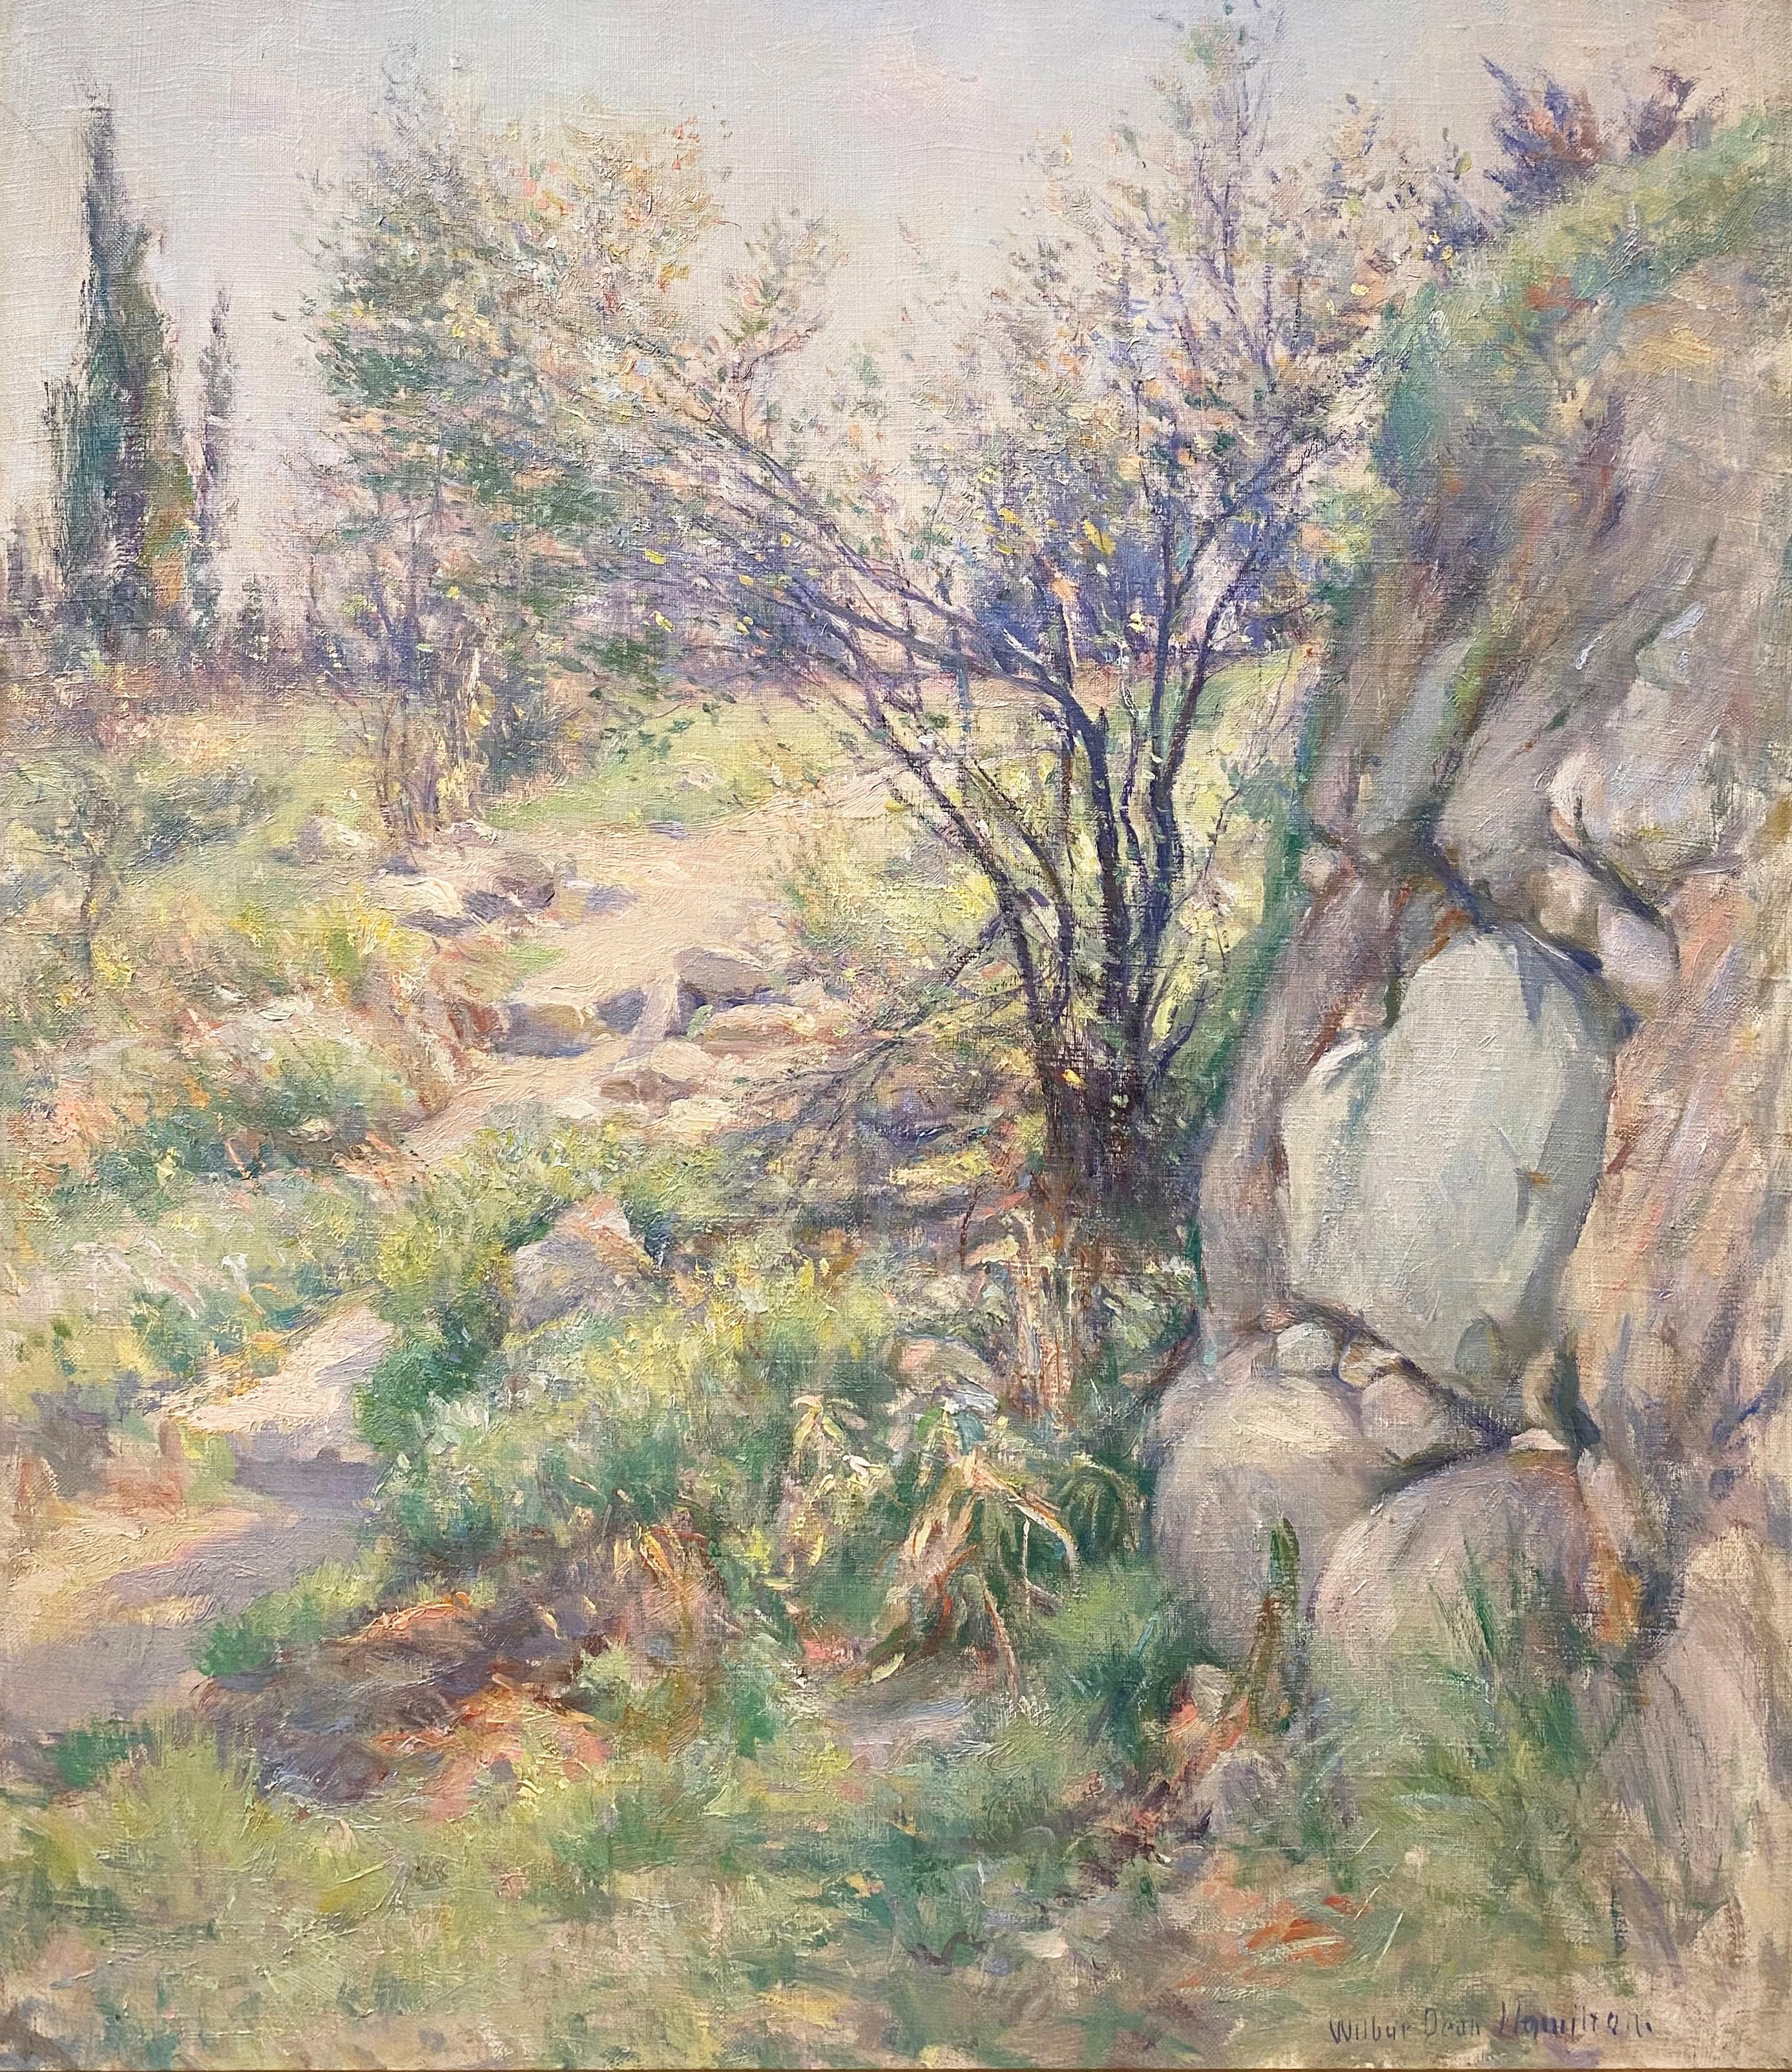 Landscape with a Rocky Path - Painting by Edward Wilbur Dean Hamilton